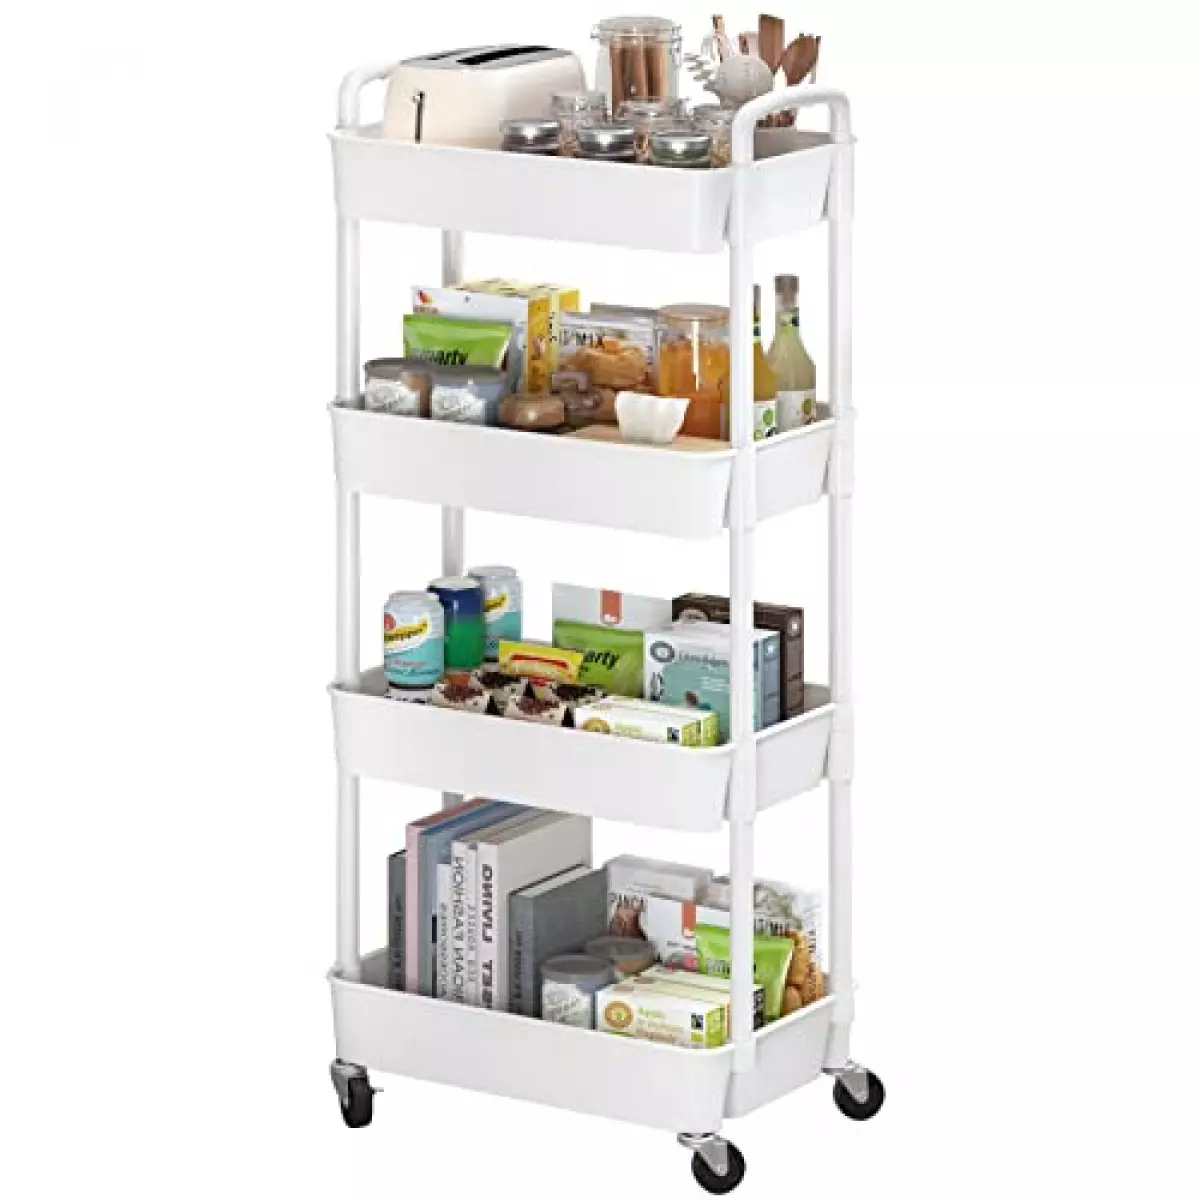 Sywhitta 4-Tier Plastic Rolling Utility Cart